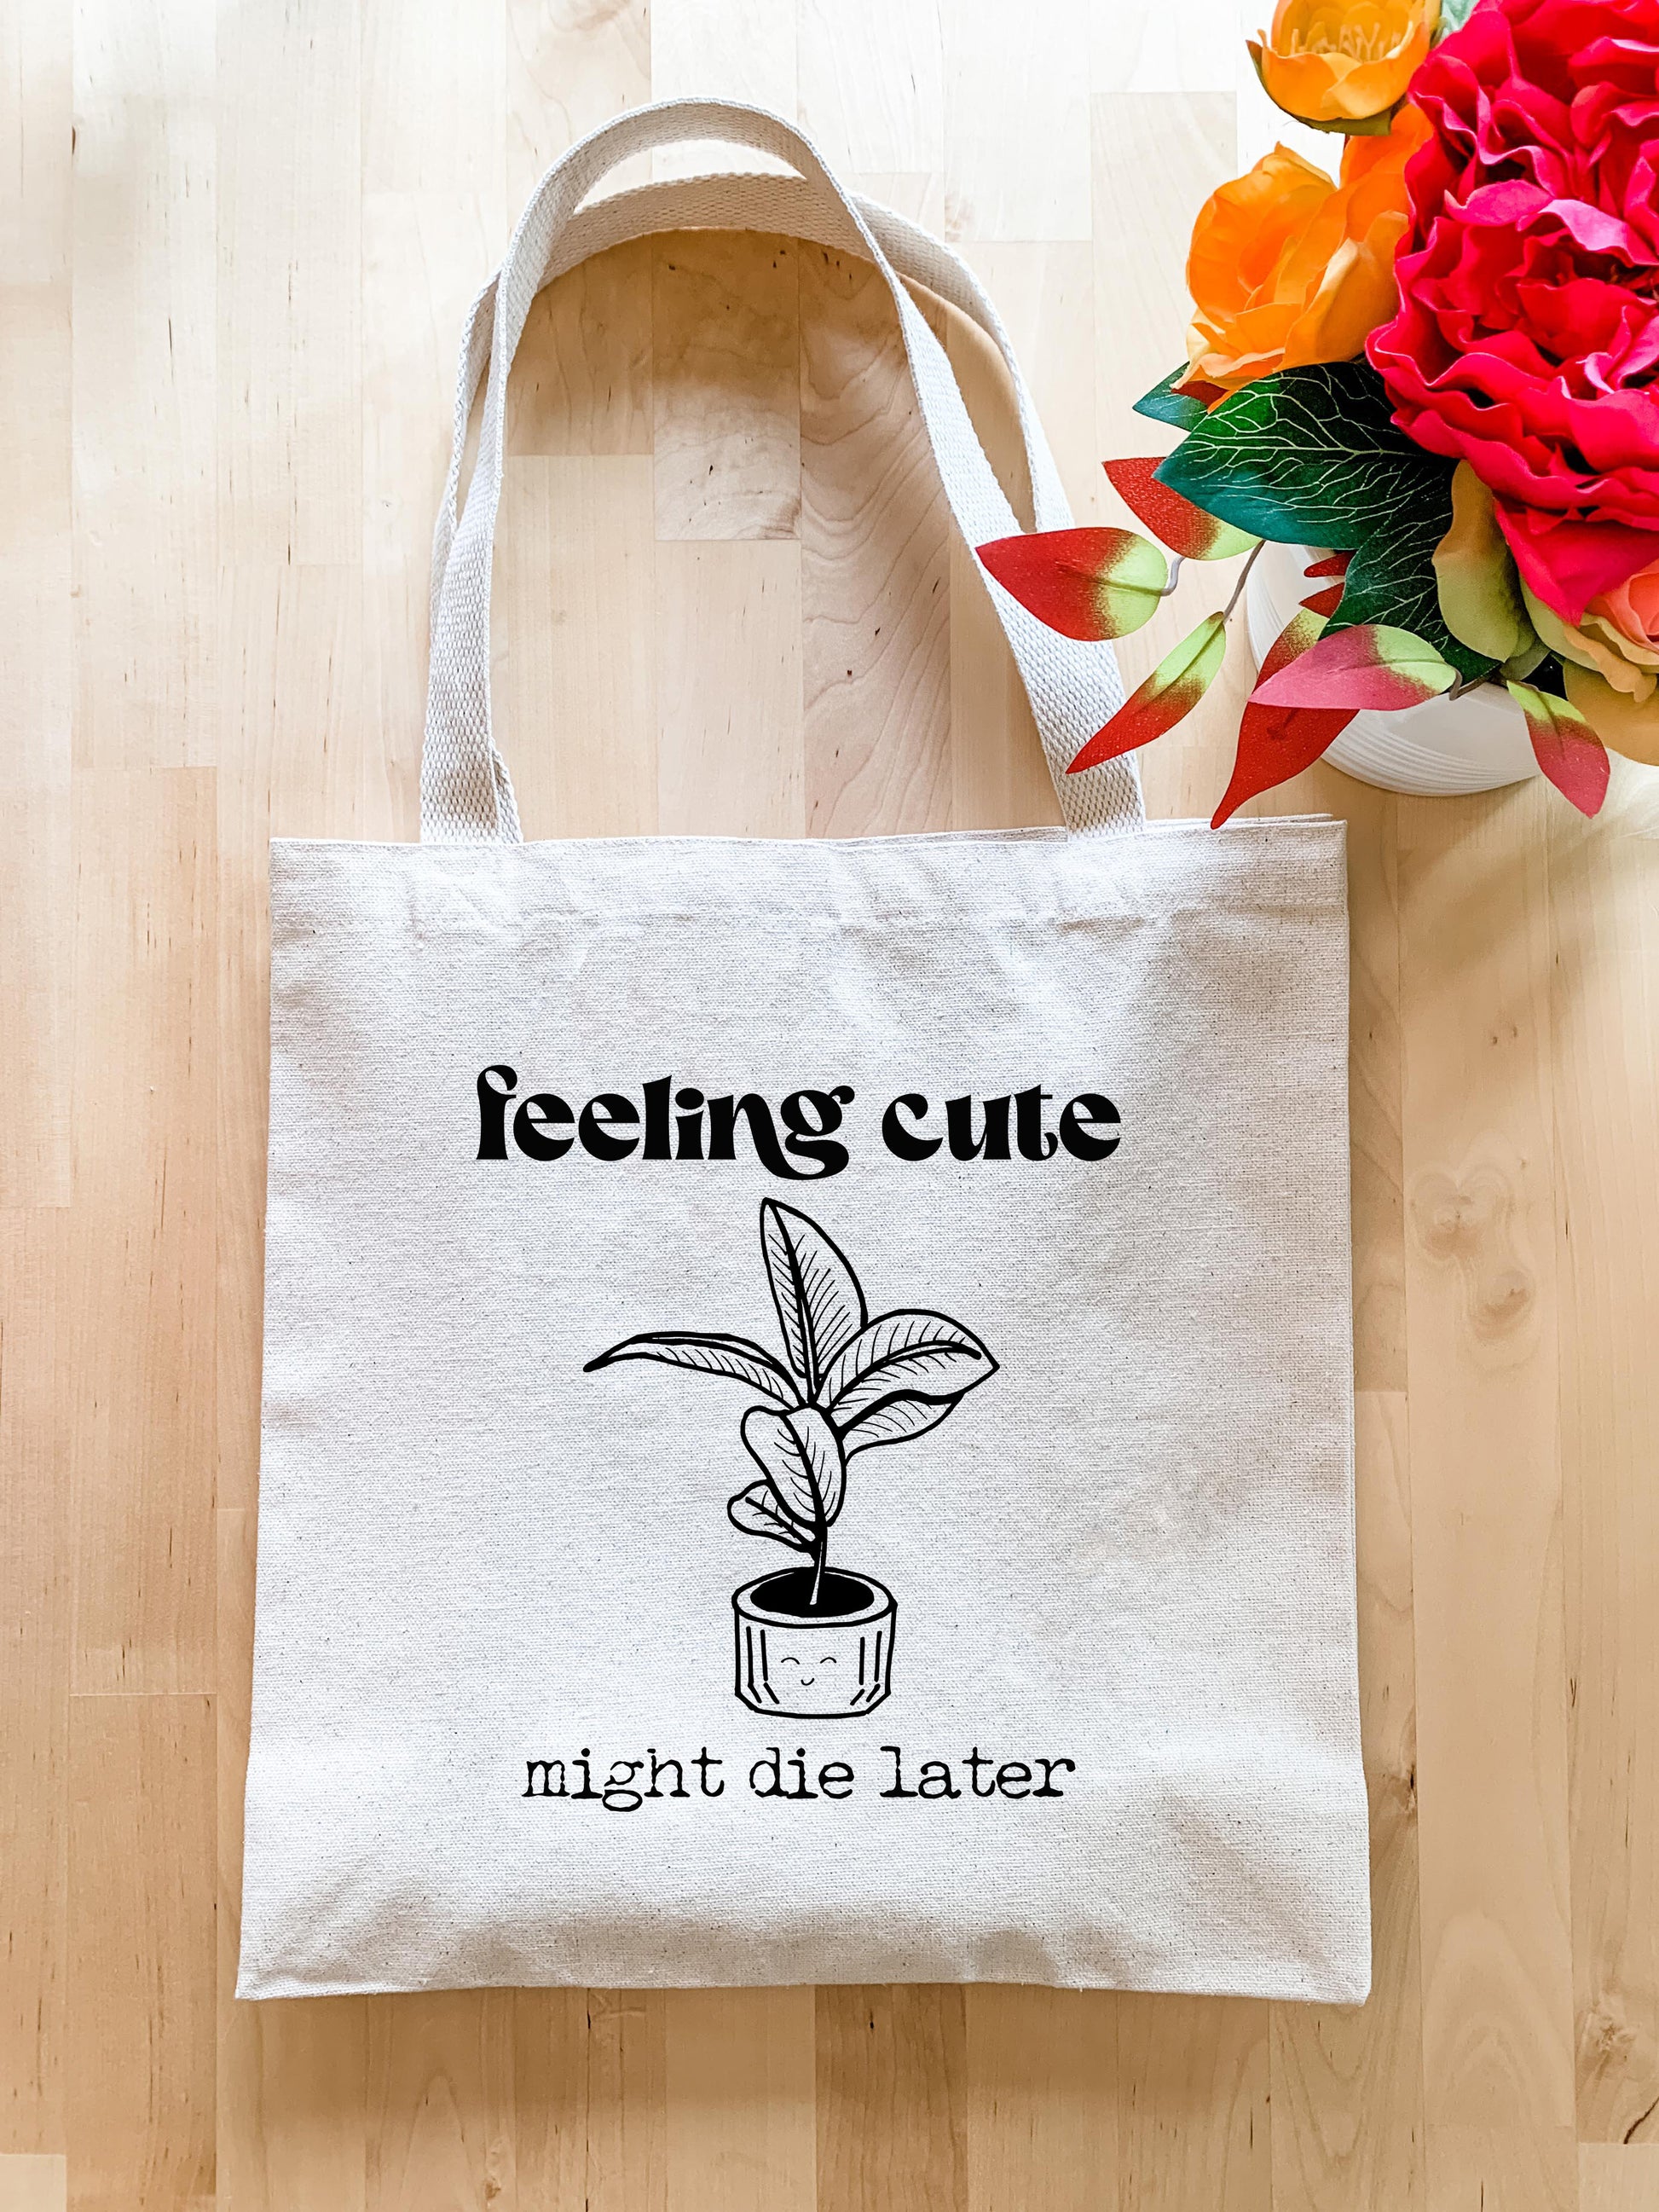 a white tote bag with a plant on it